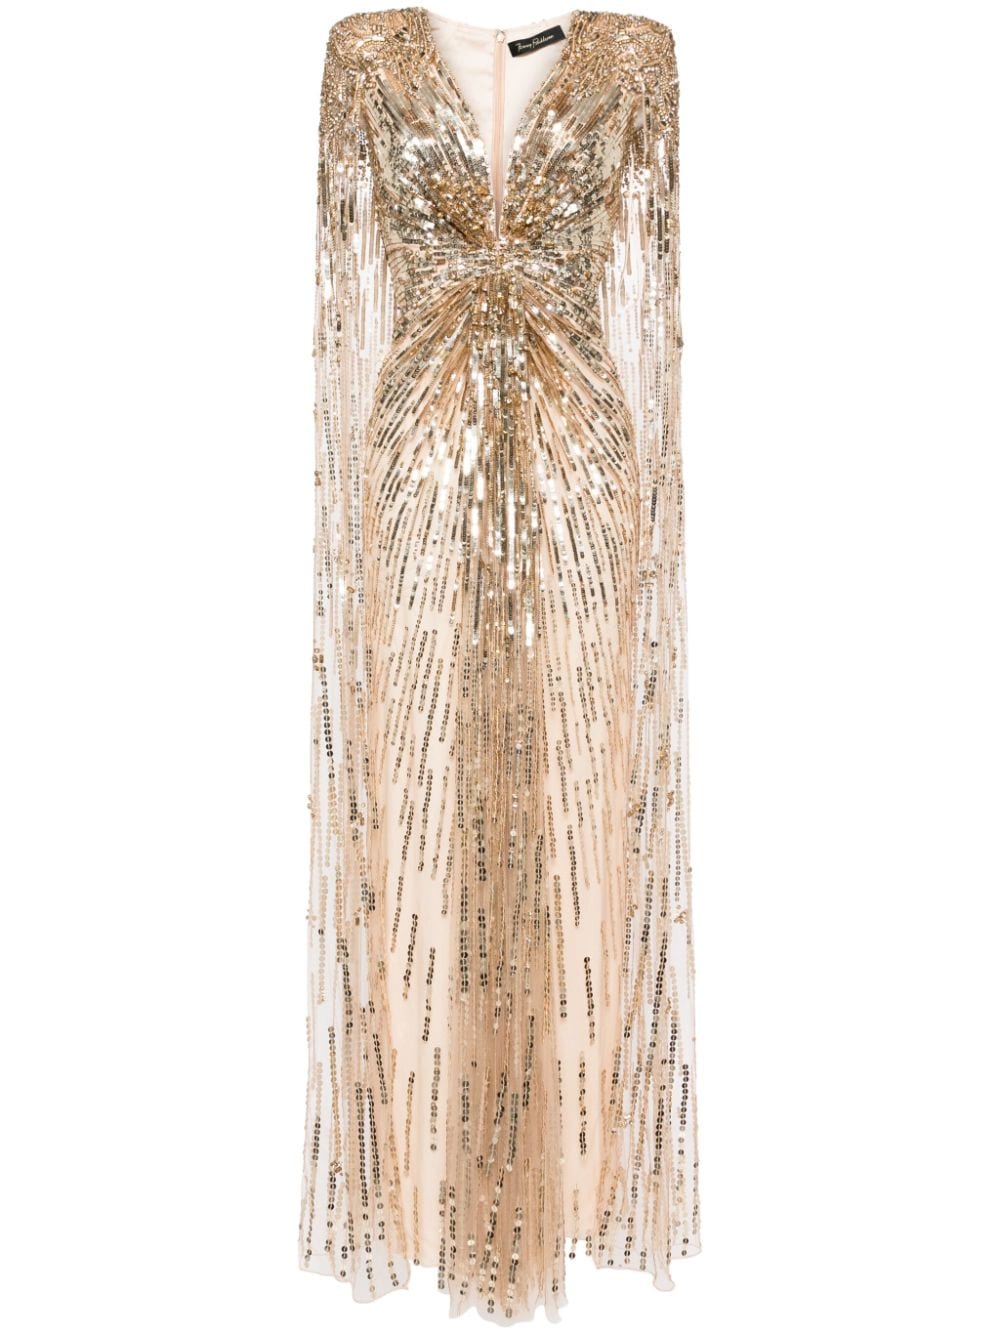 Jenny Packham Gold Rush Sequined Cape Gown